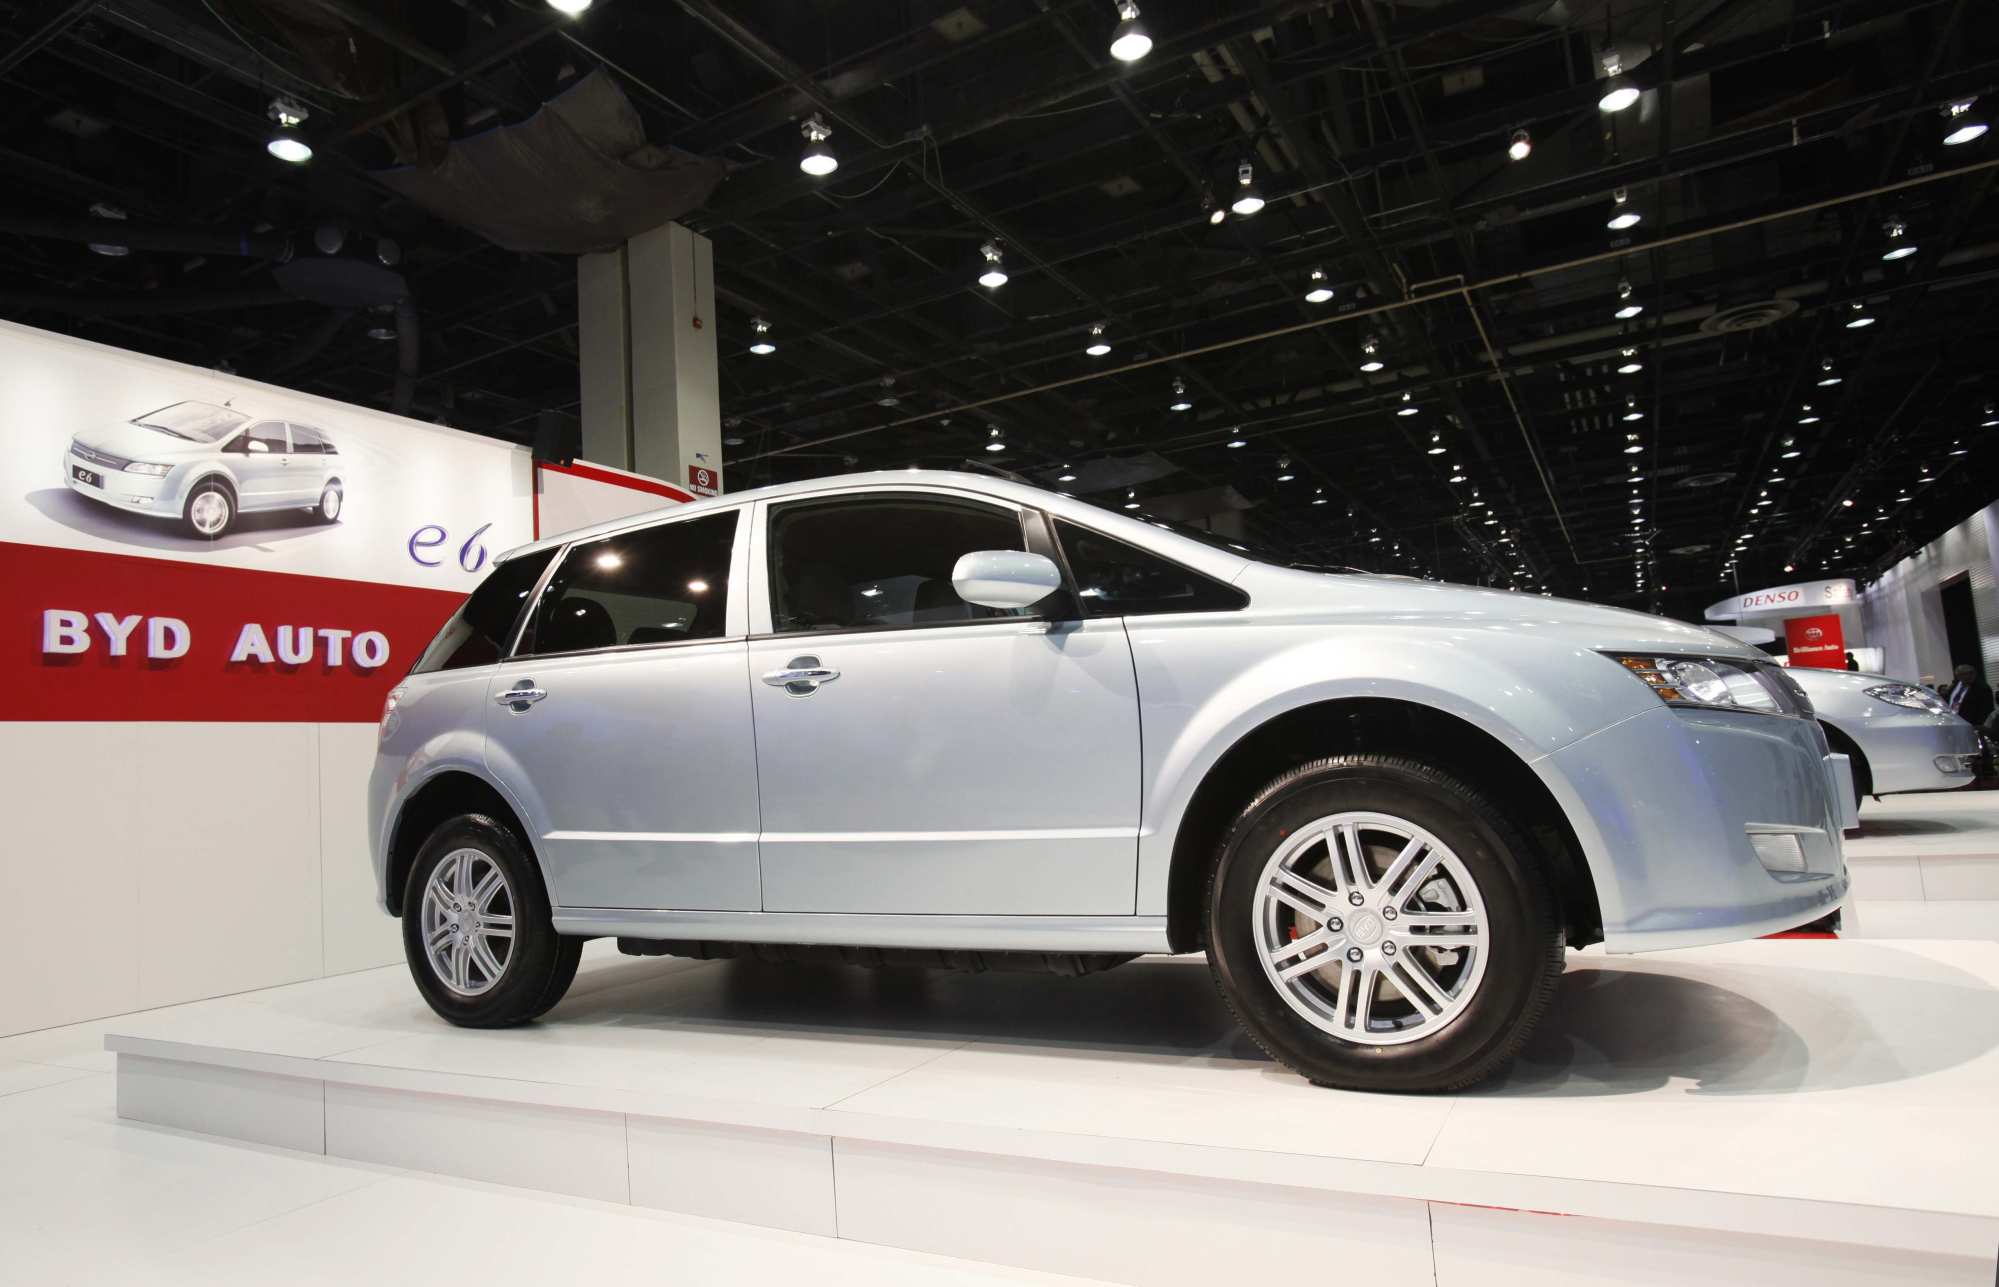 BYD’s first fully electric compact car e6, on display at the North American International Auto Show, also known as the Detroit Auto Show, in Michigan on January 12, 2009. Photo: Reuters.